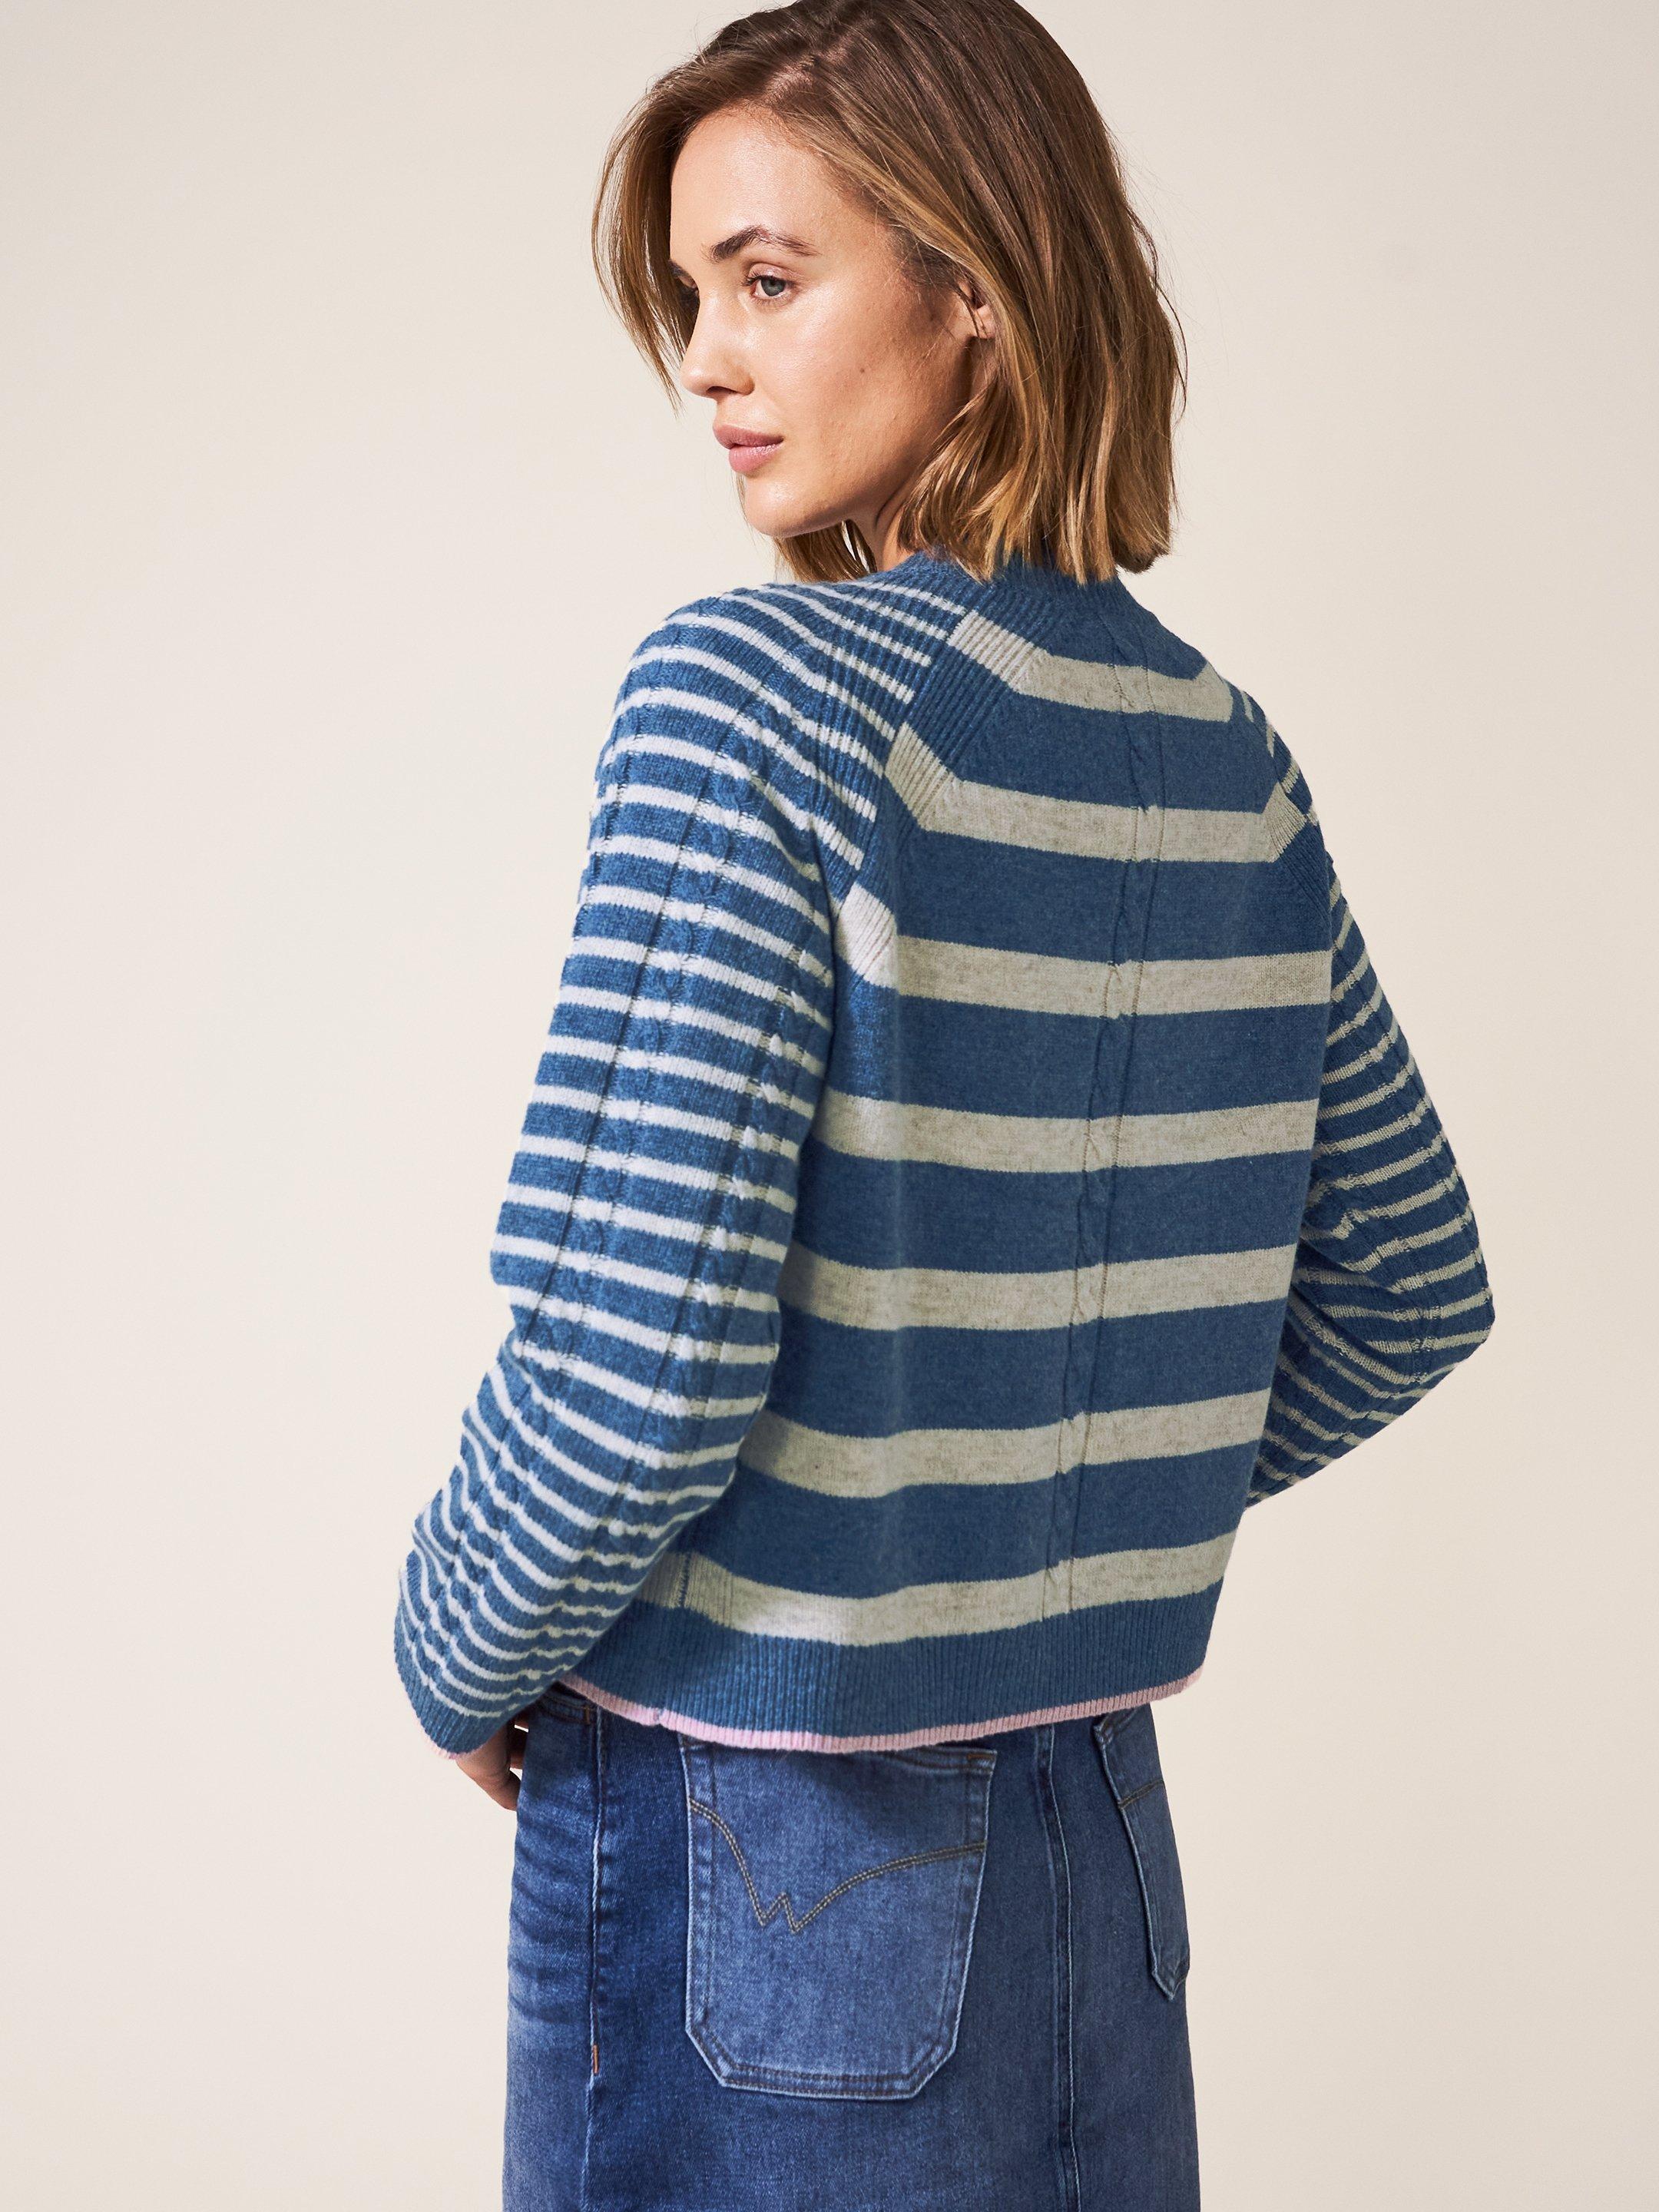 Woodland Cable Cardi in BLUE MLT - MODEL BACK